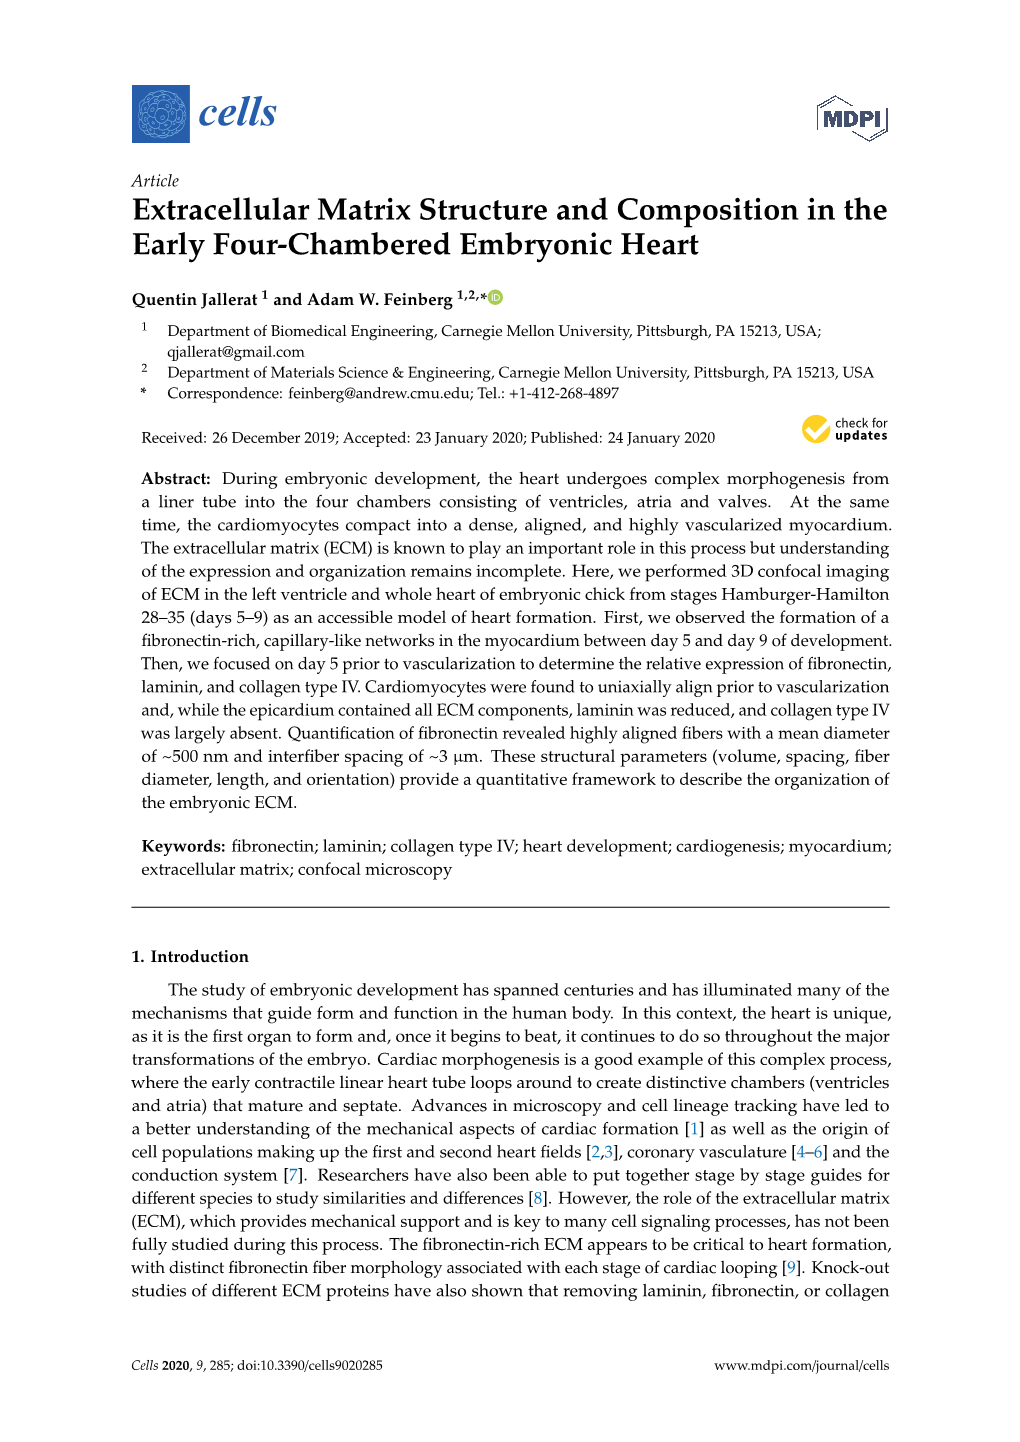 Extracellular Matrix Structure and Composition in the Early Four-Chambered Embryonic Heart